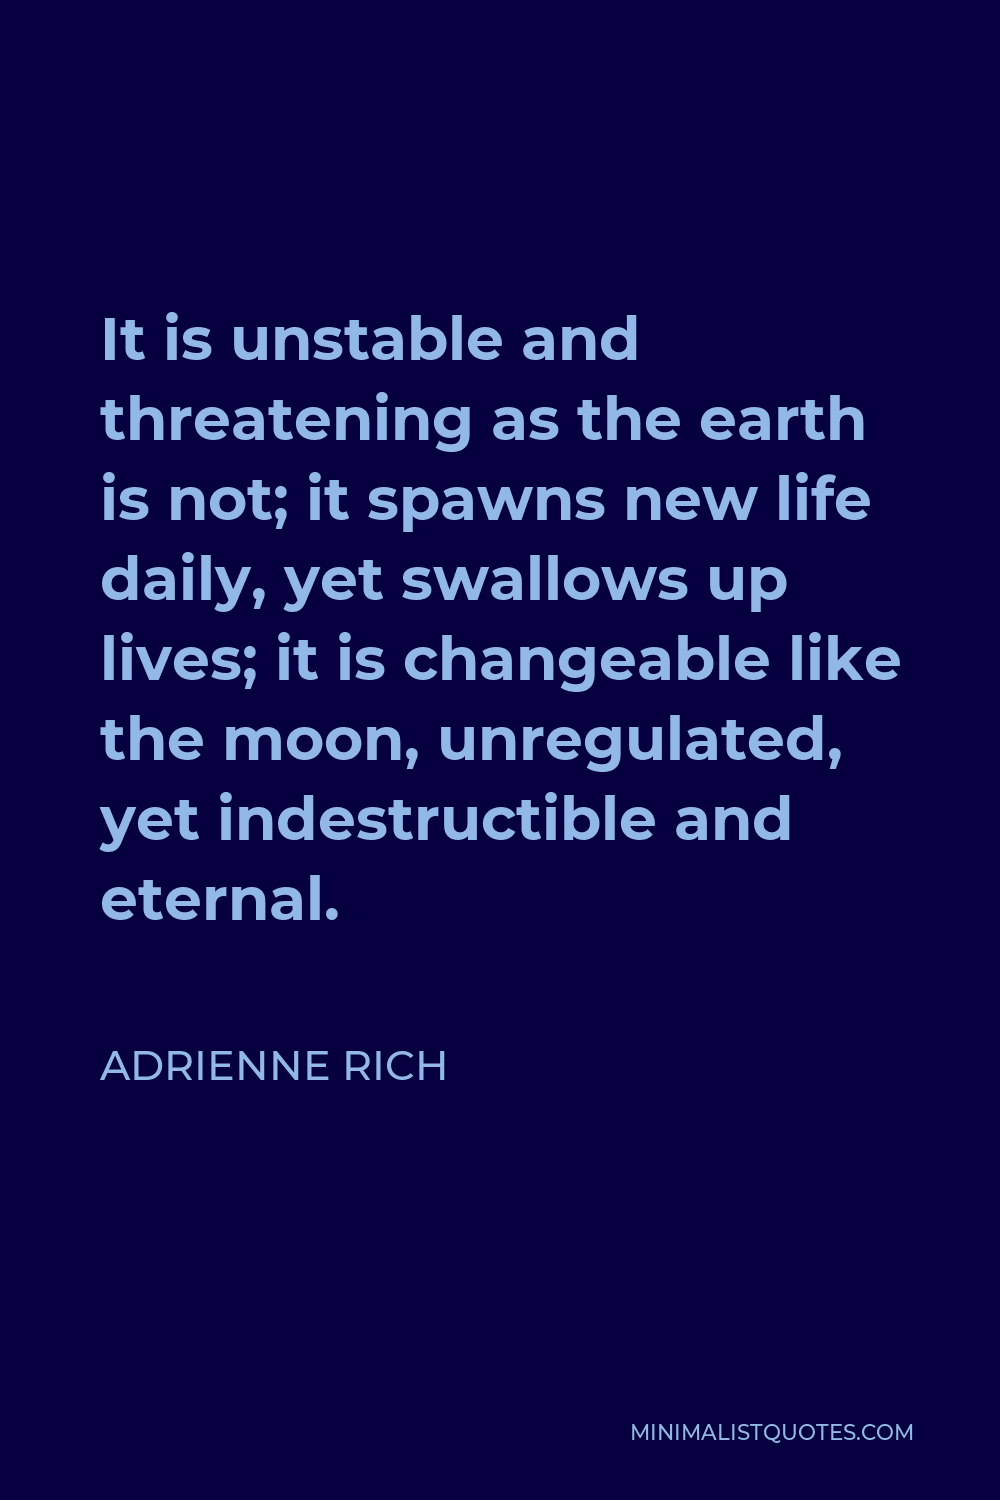 Adrienne Rich Quote - It is unstable and threatening as the earth is not; it spawns new life daily, yet swallows up lives; it is changeable like the moon, unregulated, yet indestructible and eternal.